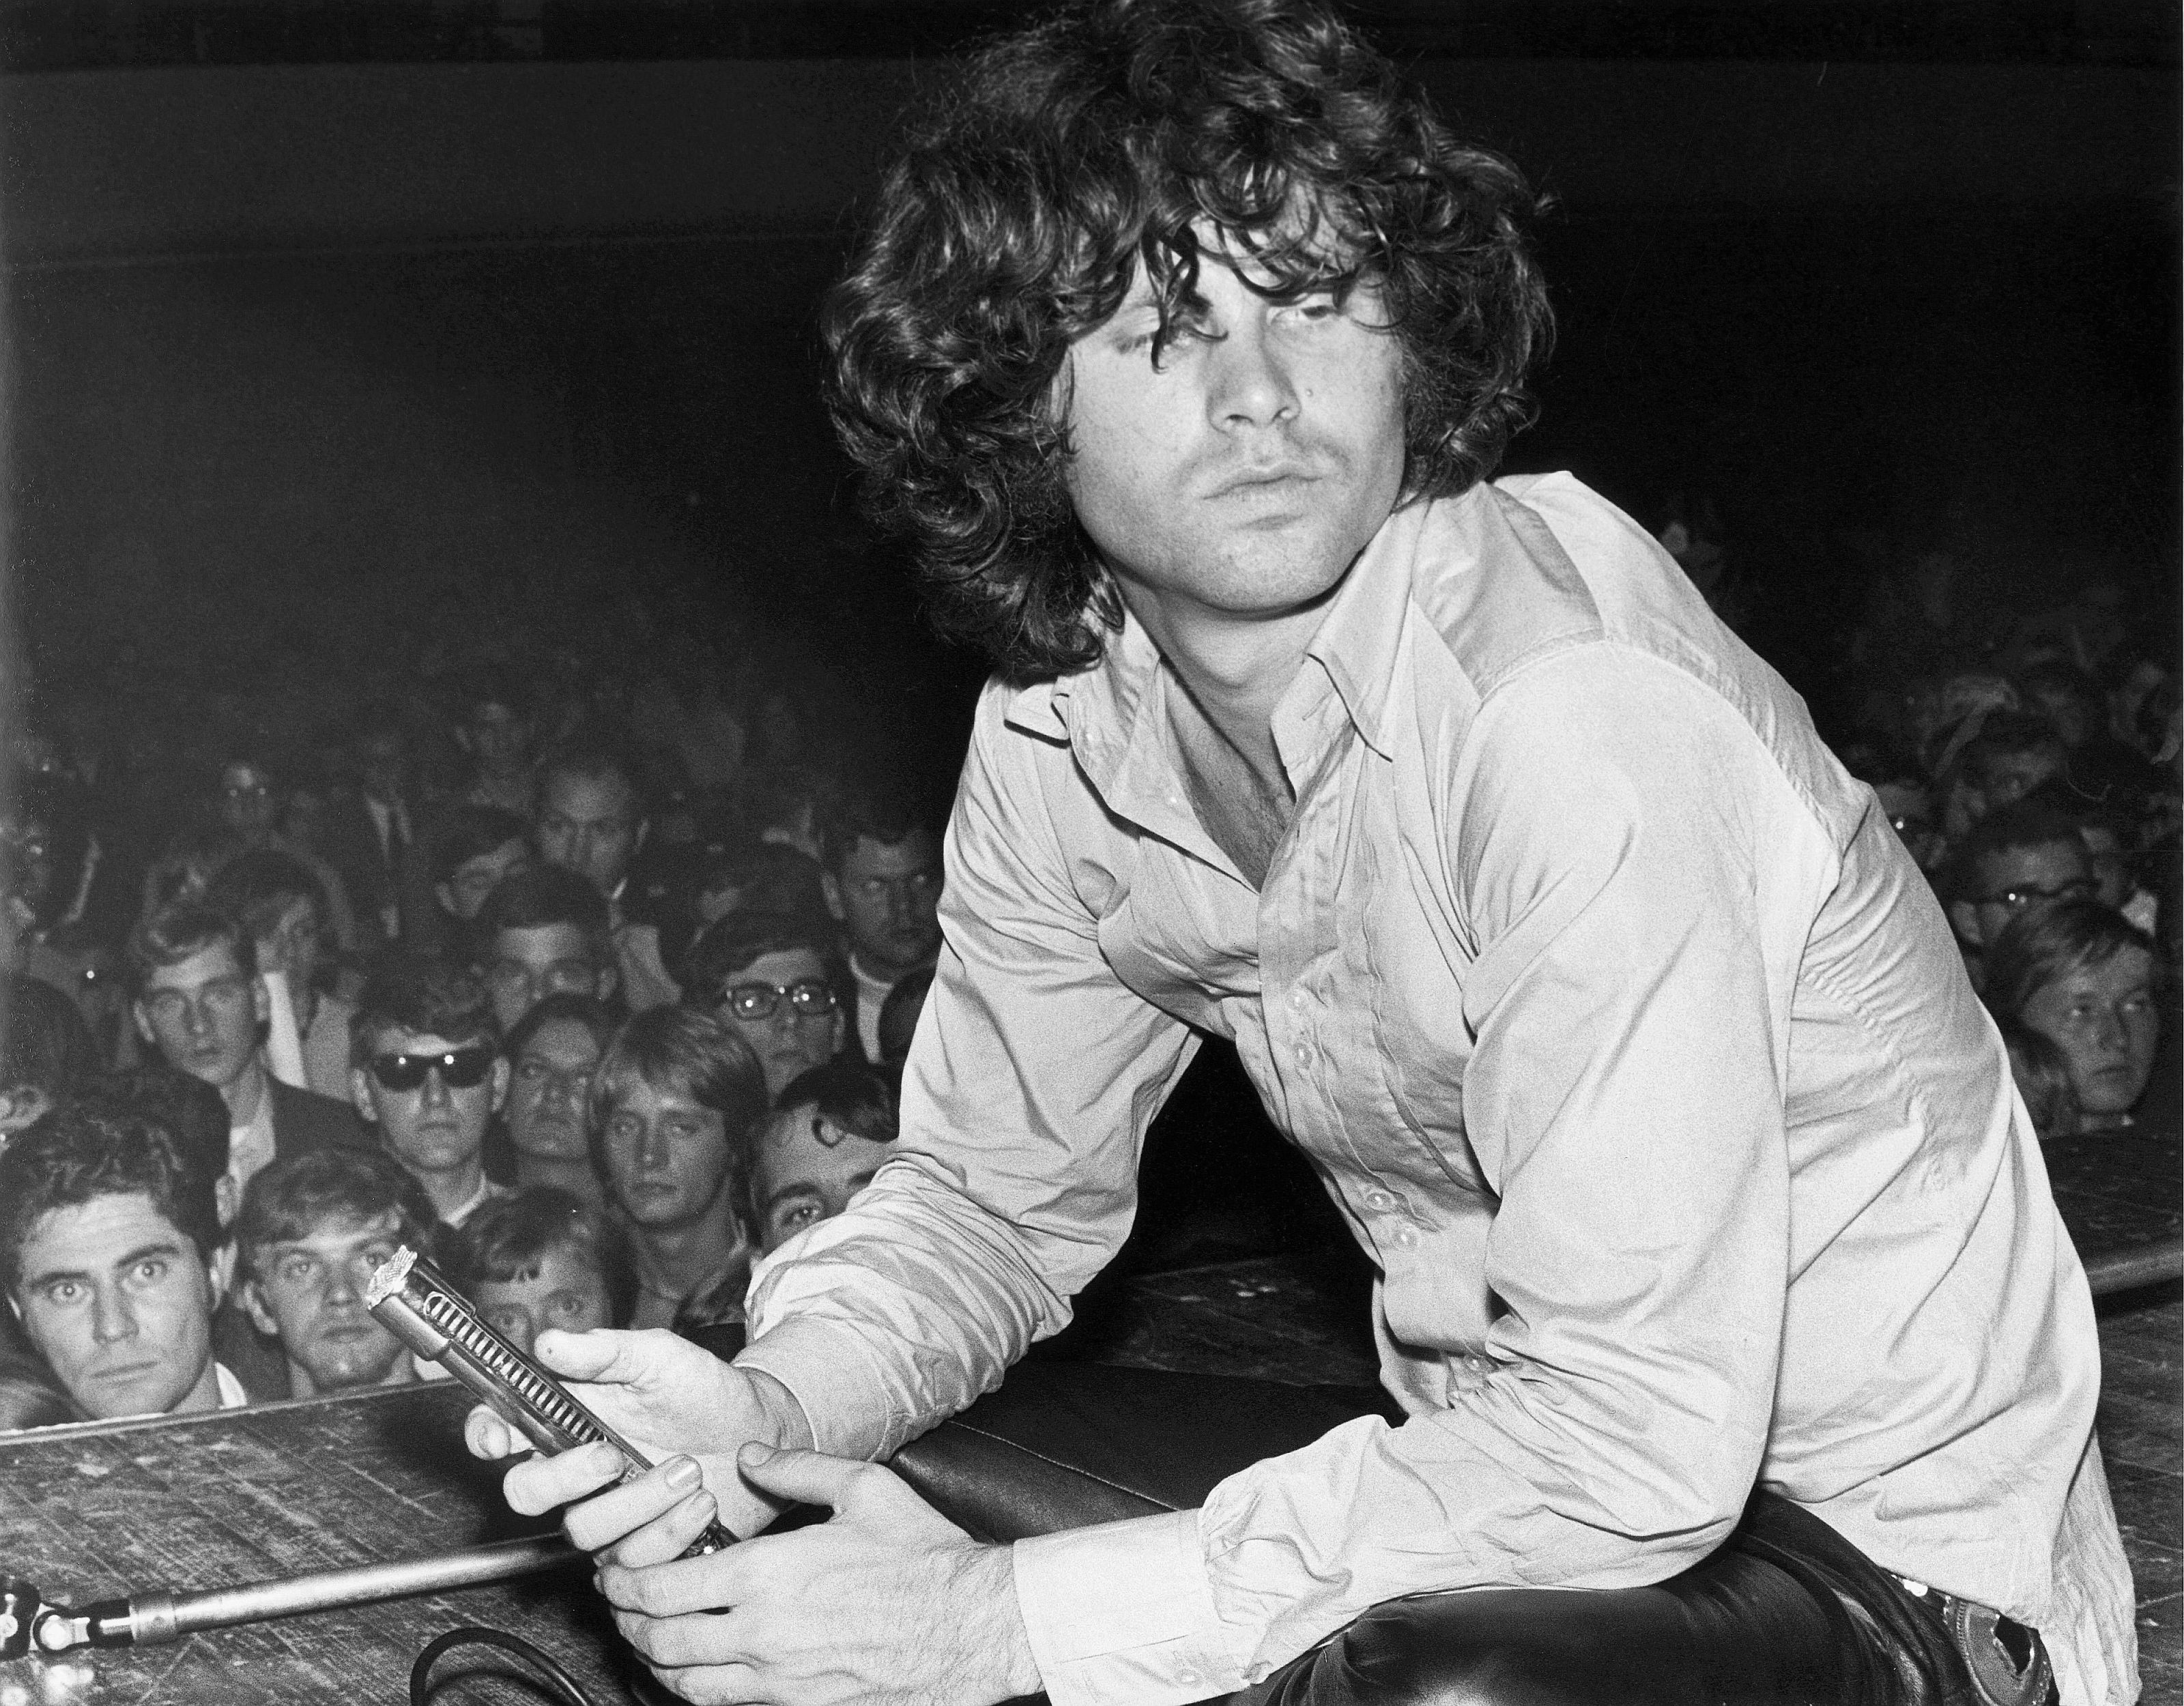 <p>The Doors' Jim Morrison embarked on a tumultuous journey with LSD, a drug that held sacred significance for him and his bandmates but ultimately contributed to his descent into turmoil and madness. Despite LSD's allure as a visionary tool, Morrison's reckless indulgence in various drugs underscored his inner turmoil and self-destructive tendencies, embodying the archetype of the 1960s rock star—vibrant with poetic visions yet ensnared by addiction and narcissism. The Door's keyboardist, Ray Manzarek's reflections on the sanctity of LSD as a sacrament highlight the contrast between its intended use and Morrison's heedless experimentation. Morrison's tragic narrative serves as a cautionary tale, revealing the dangers of delving too deeply into the recesses of the mind without guidance or restraint, while also acknowledging the profound lessons about interconnectedness gleaned from psychedelic experiences.</p>